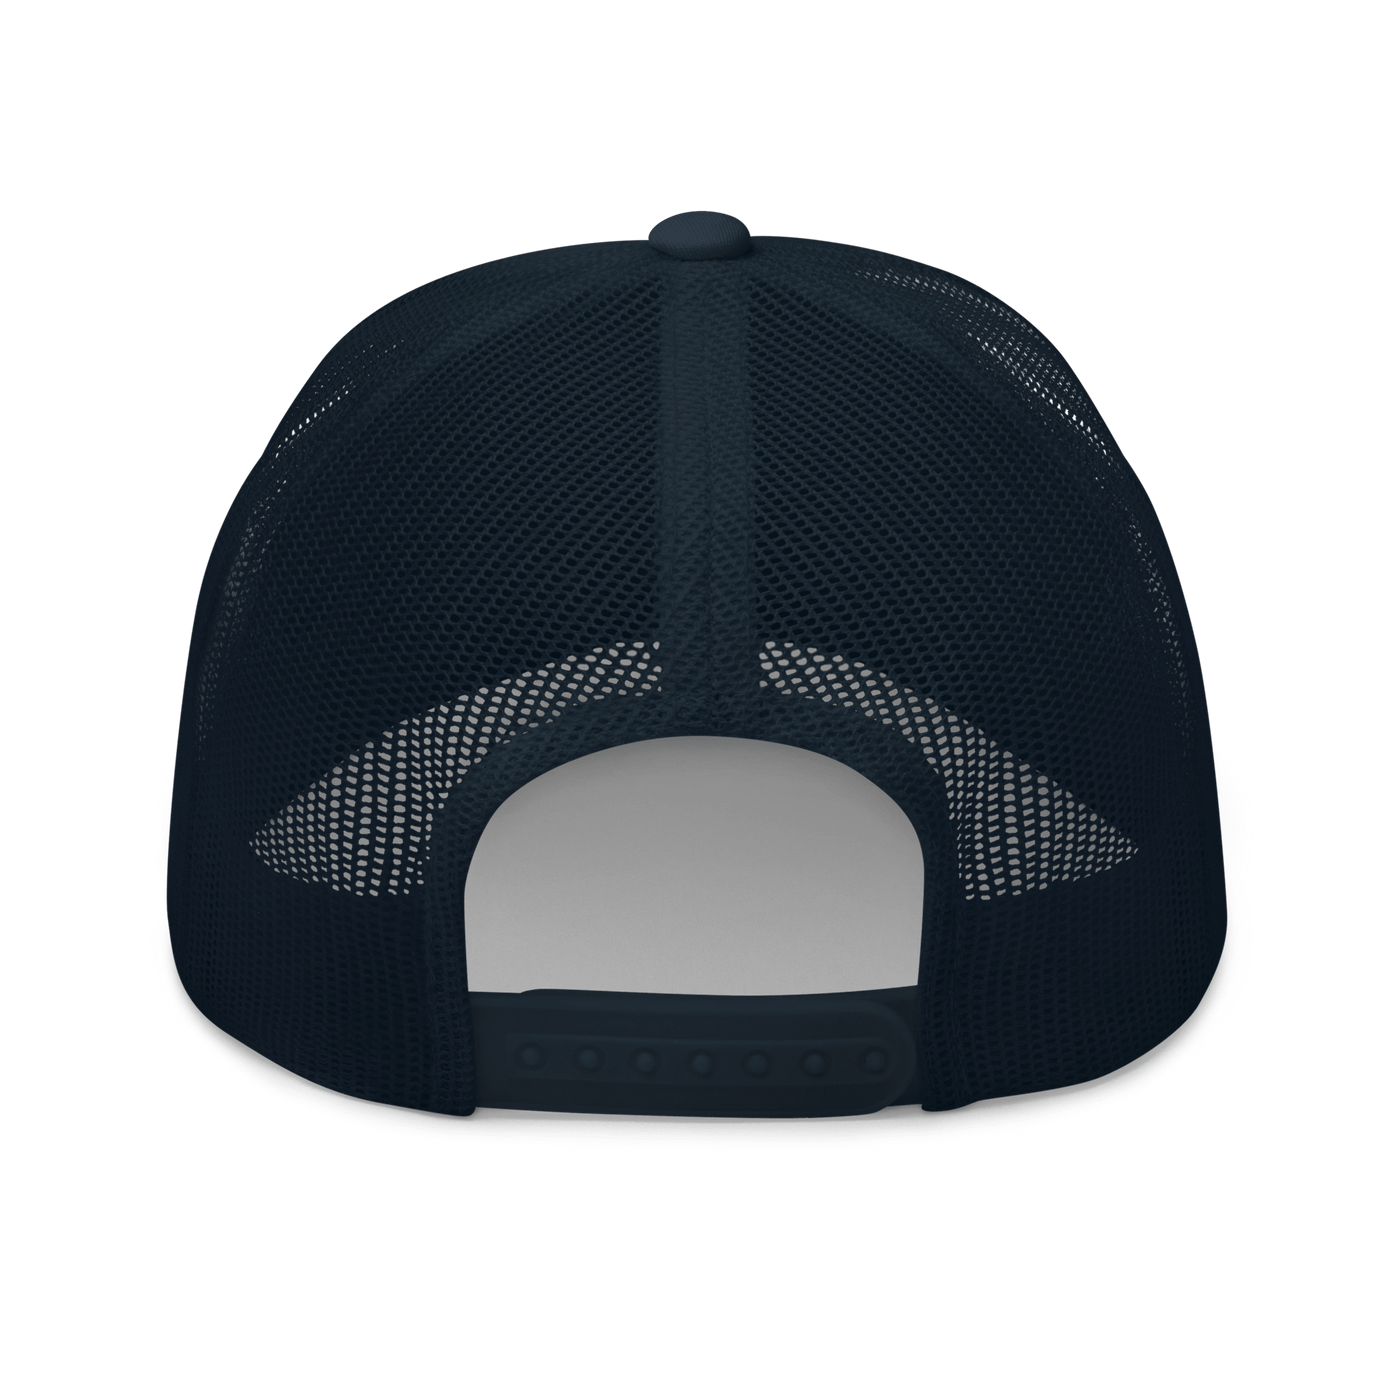 Dogs before Dudes Trucker Cap - Navy - - Just Another Cap Store